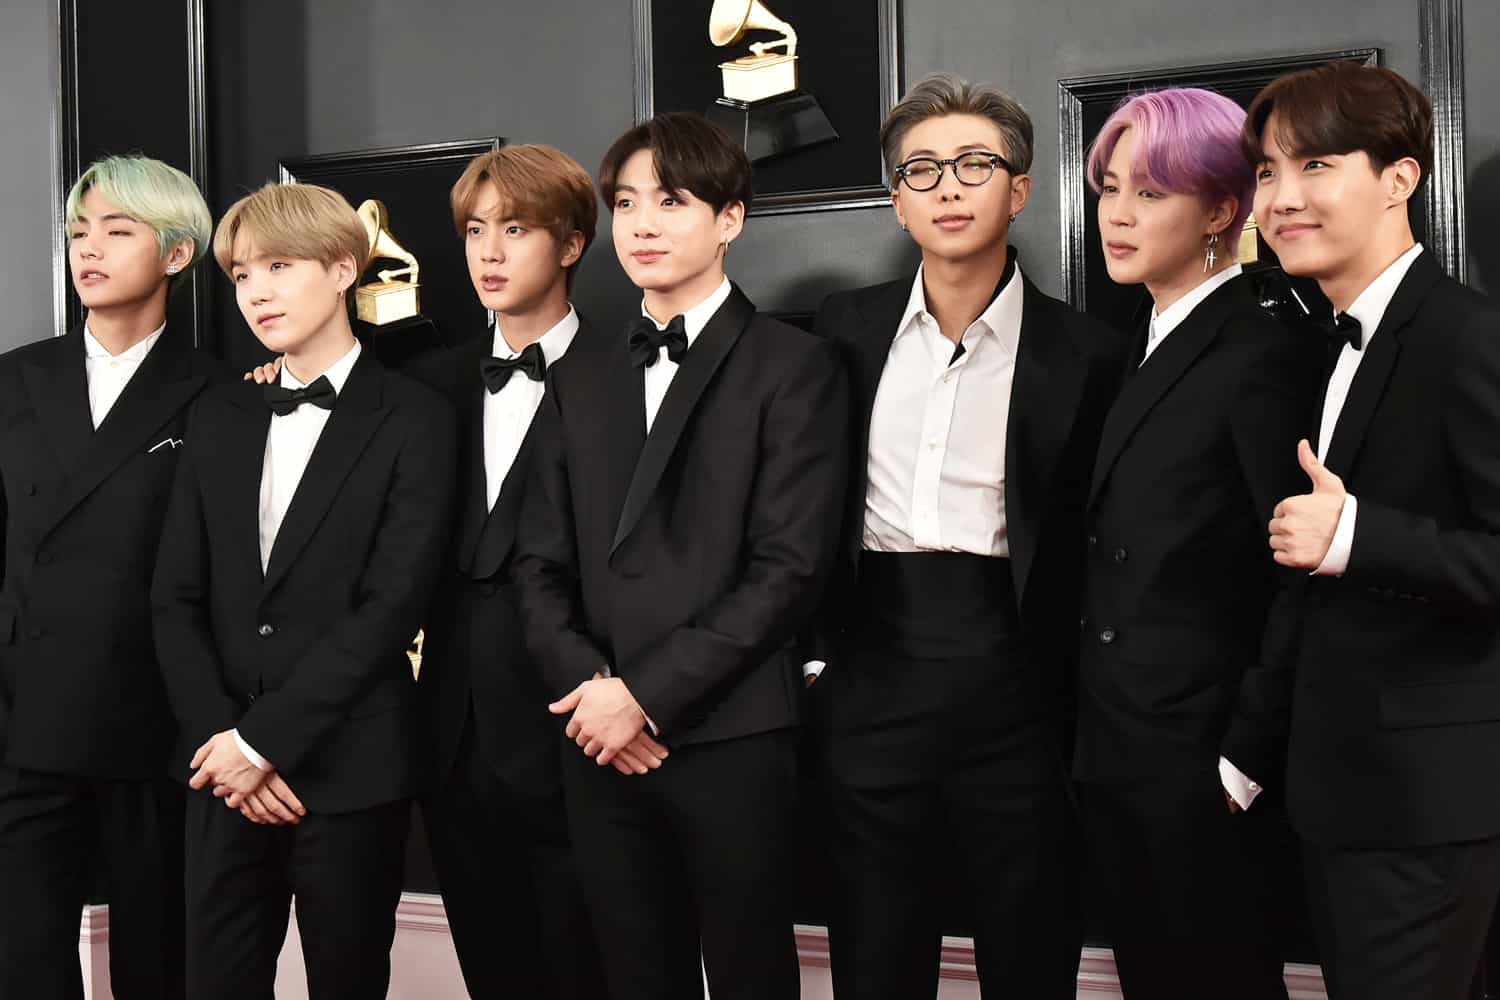 Worn Only Once, Louis Vuitton Clothes For BTS Will Be Auctioned